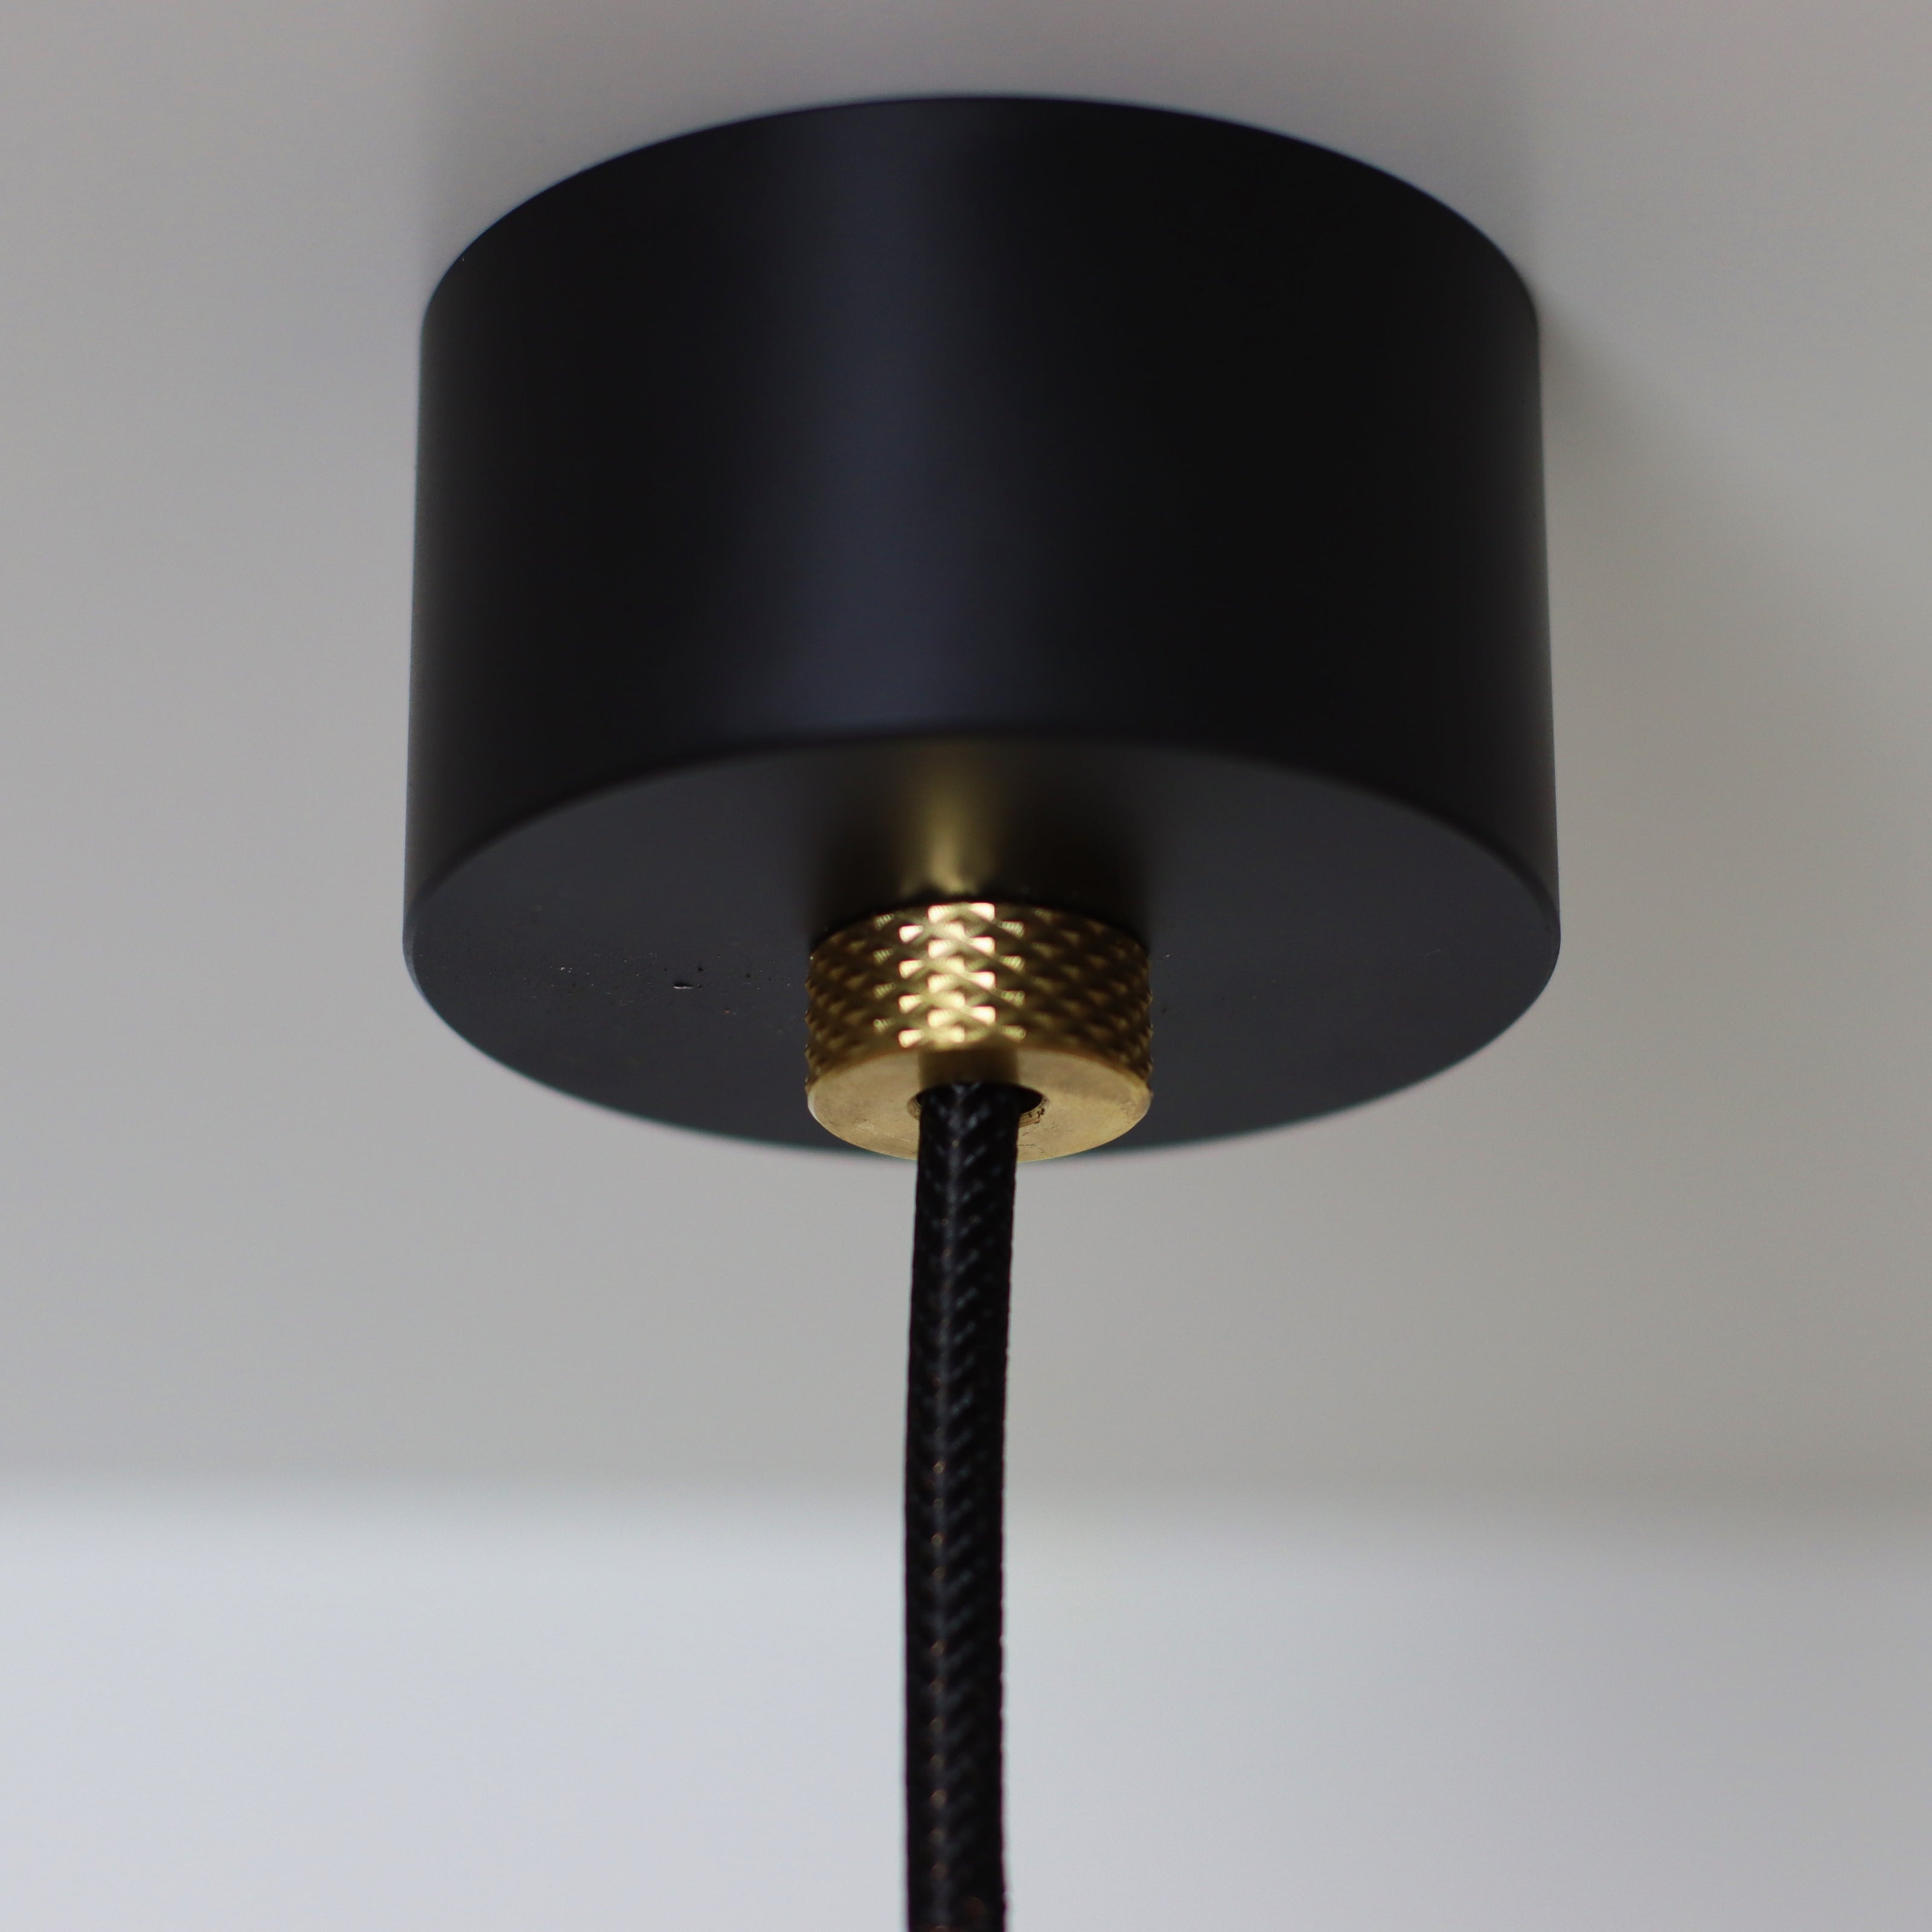 black and brass ceiling rose with fabric four core cable. solid brass knurled accent. decorative lighting. 